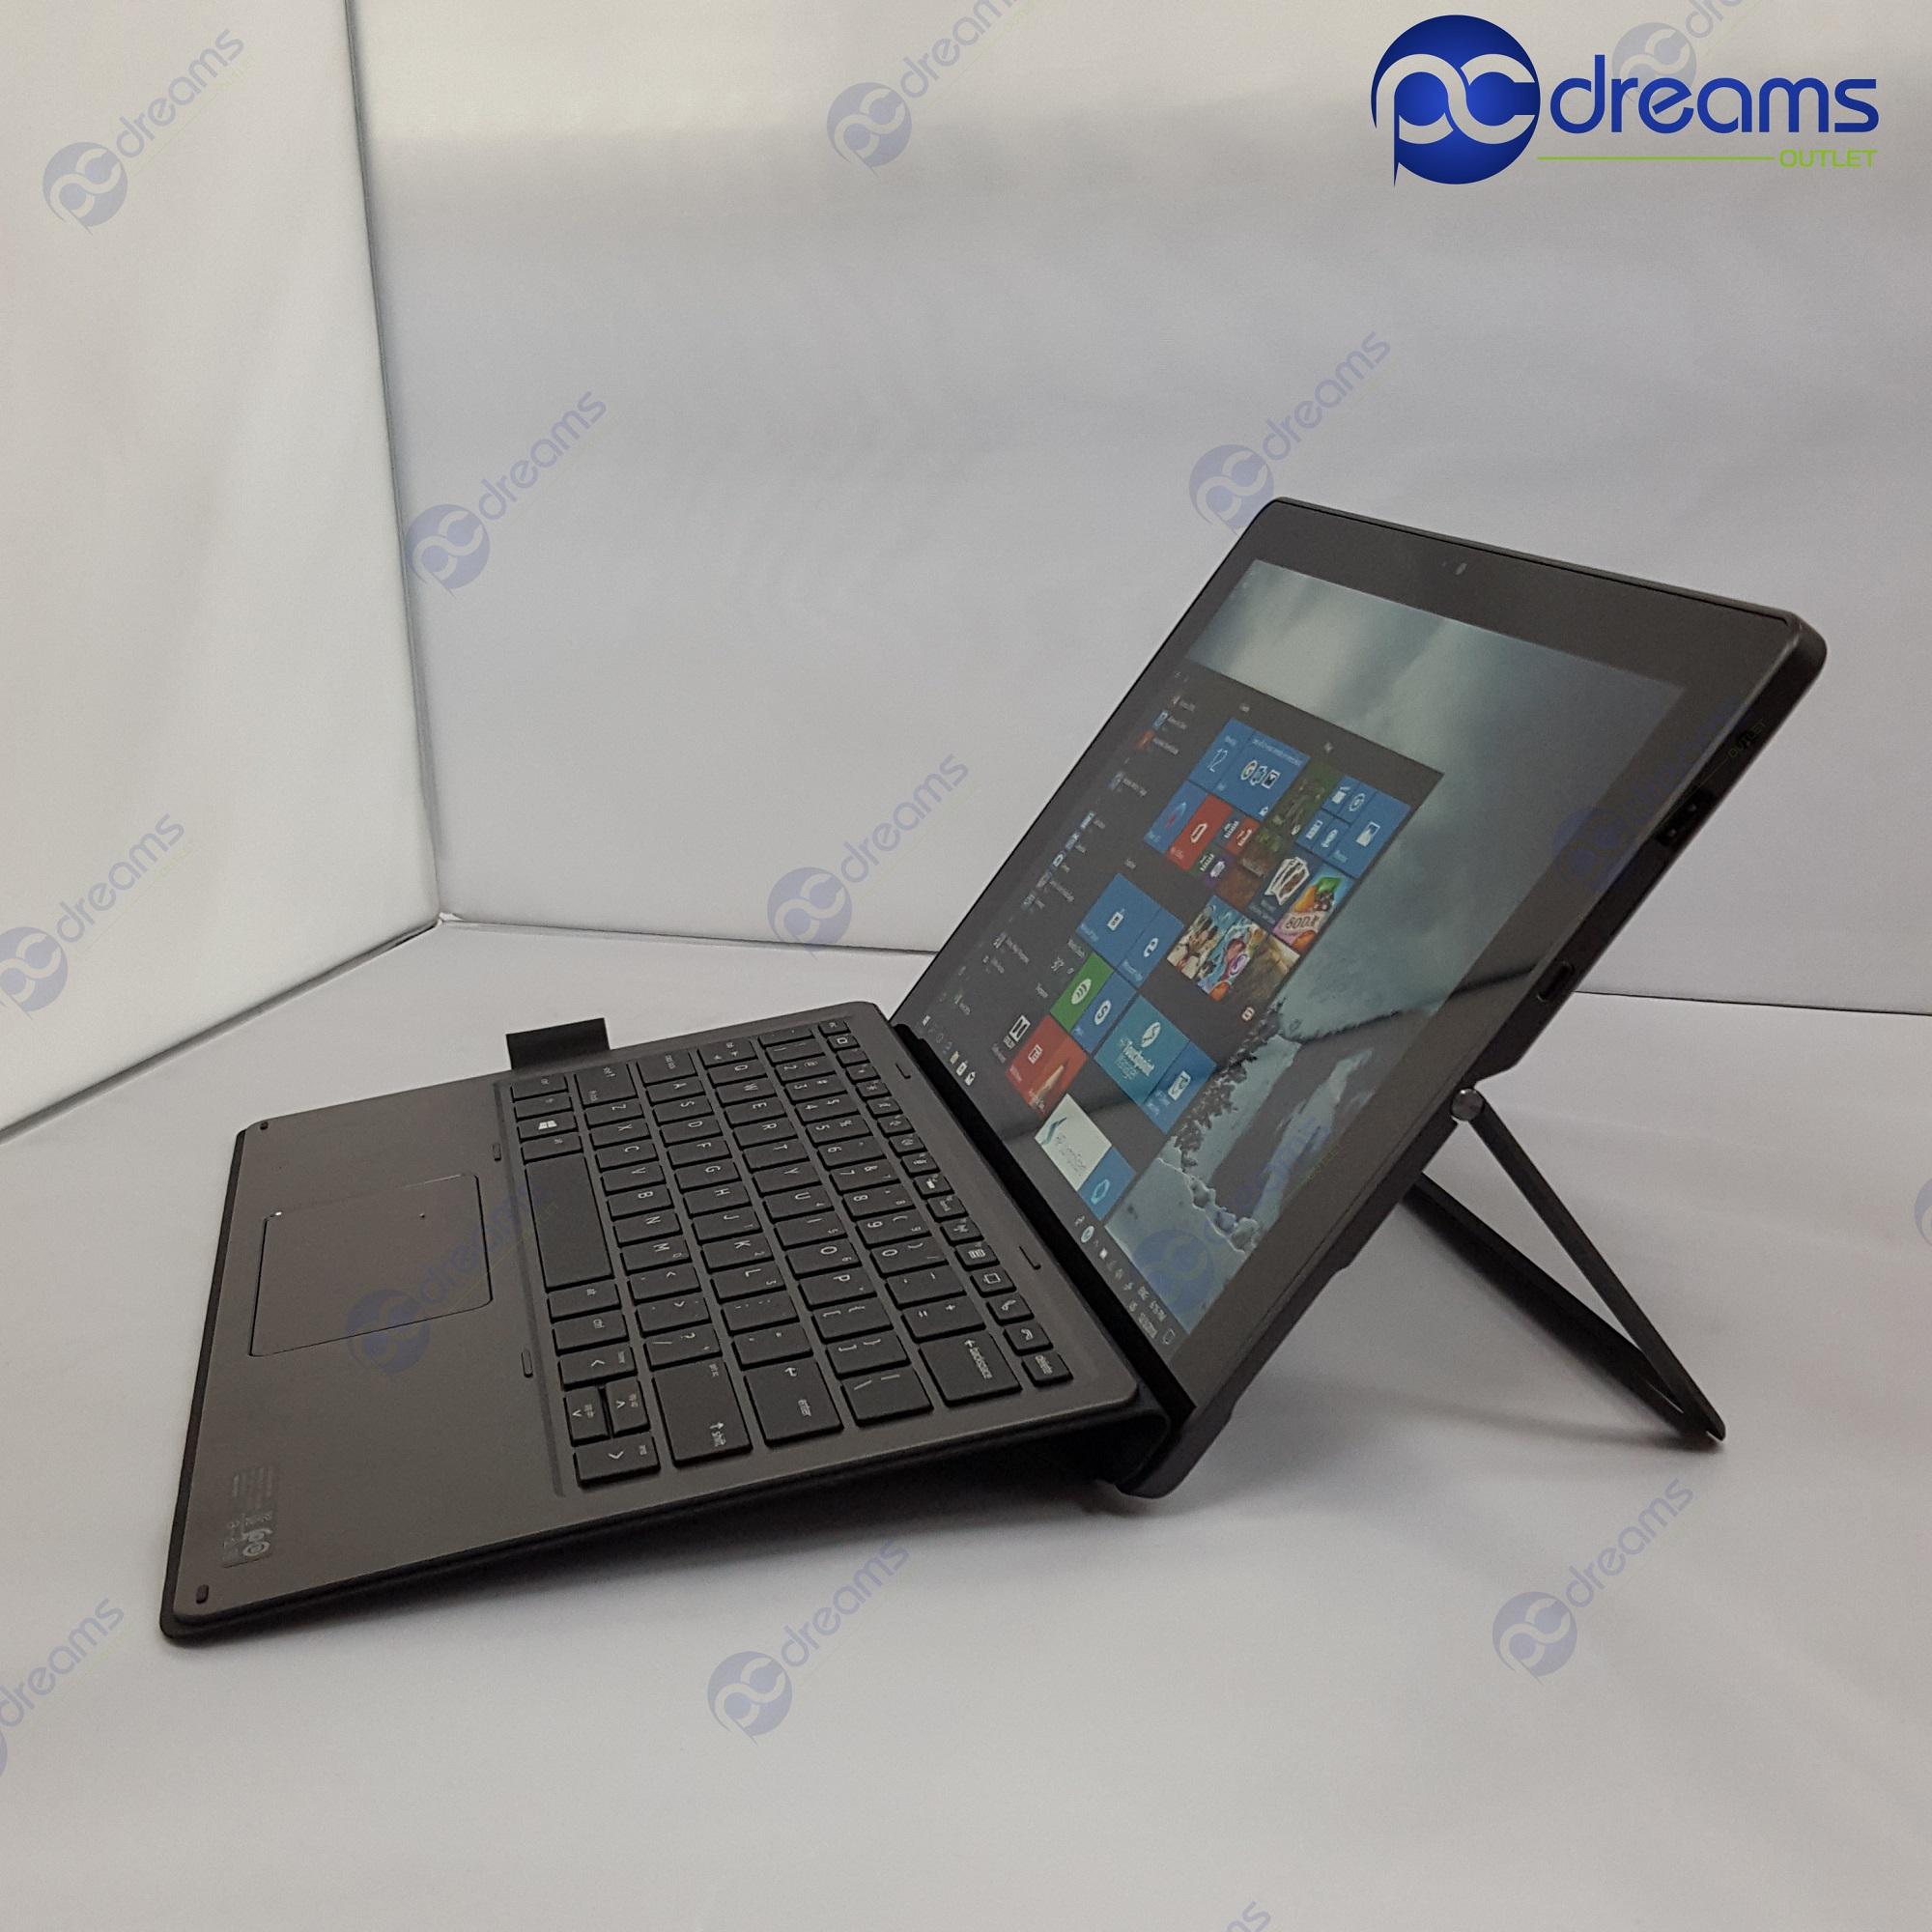 COMEX 2018! HP PRO X2 612 G2 (1ZD70AV) i5-7Y57/8GB/256GB PICe NVMe SSD [Premium Refreshed]